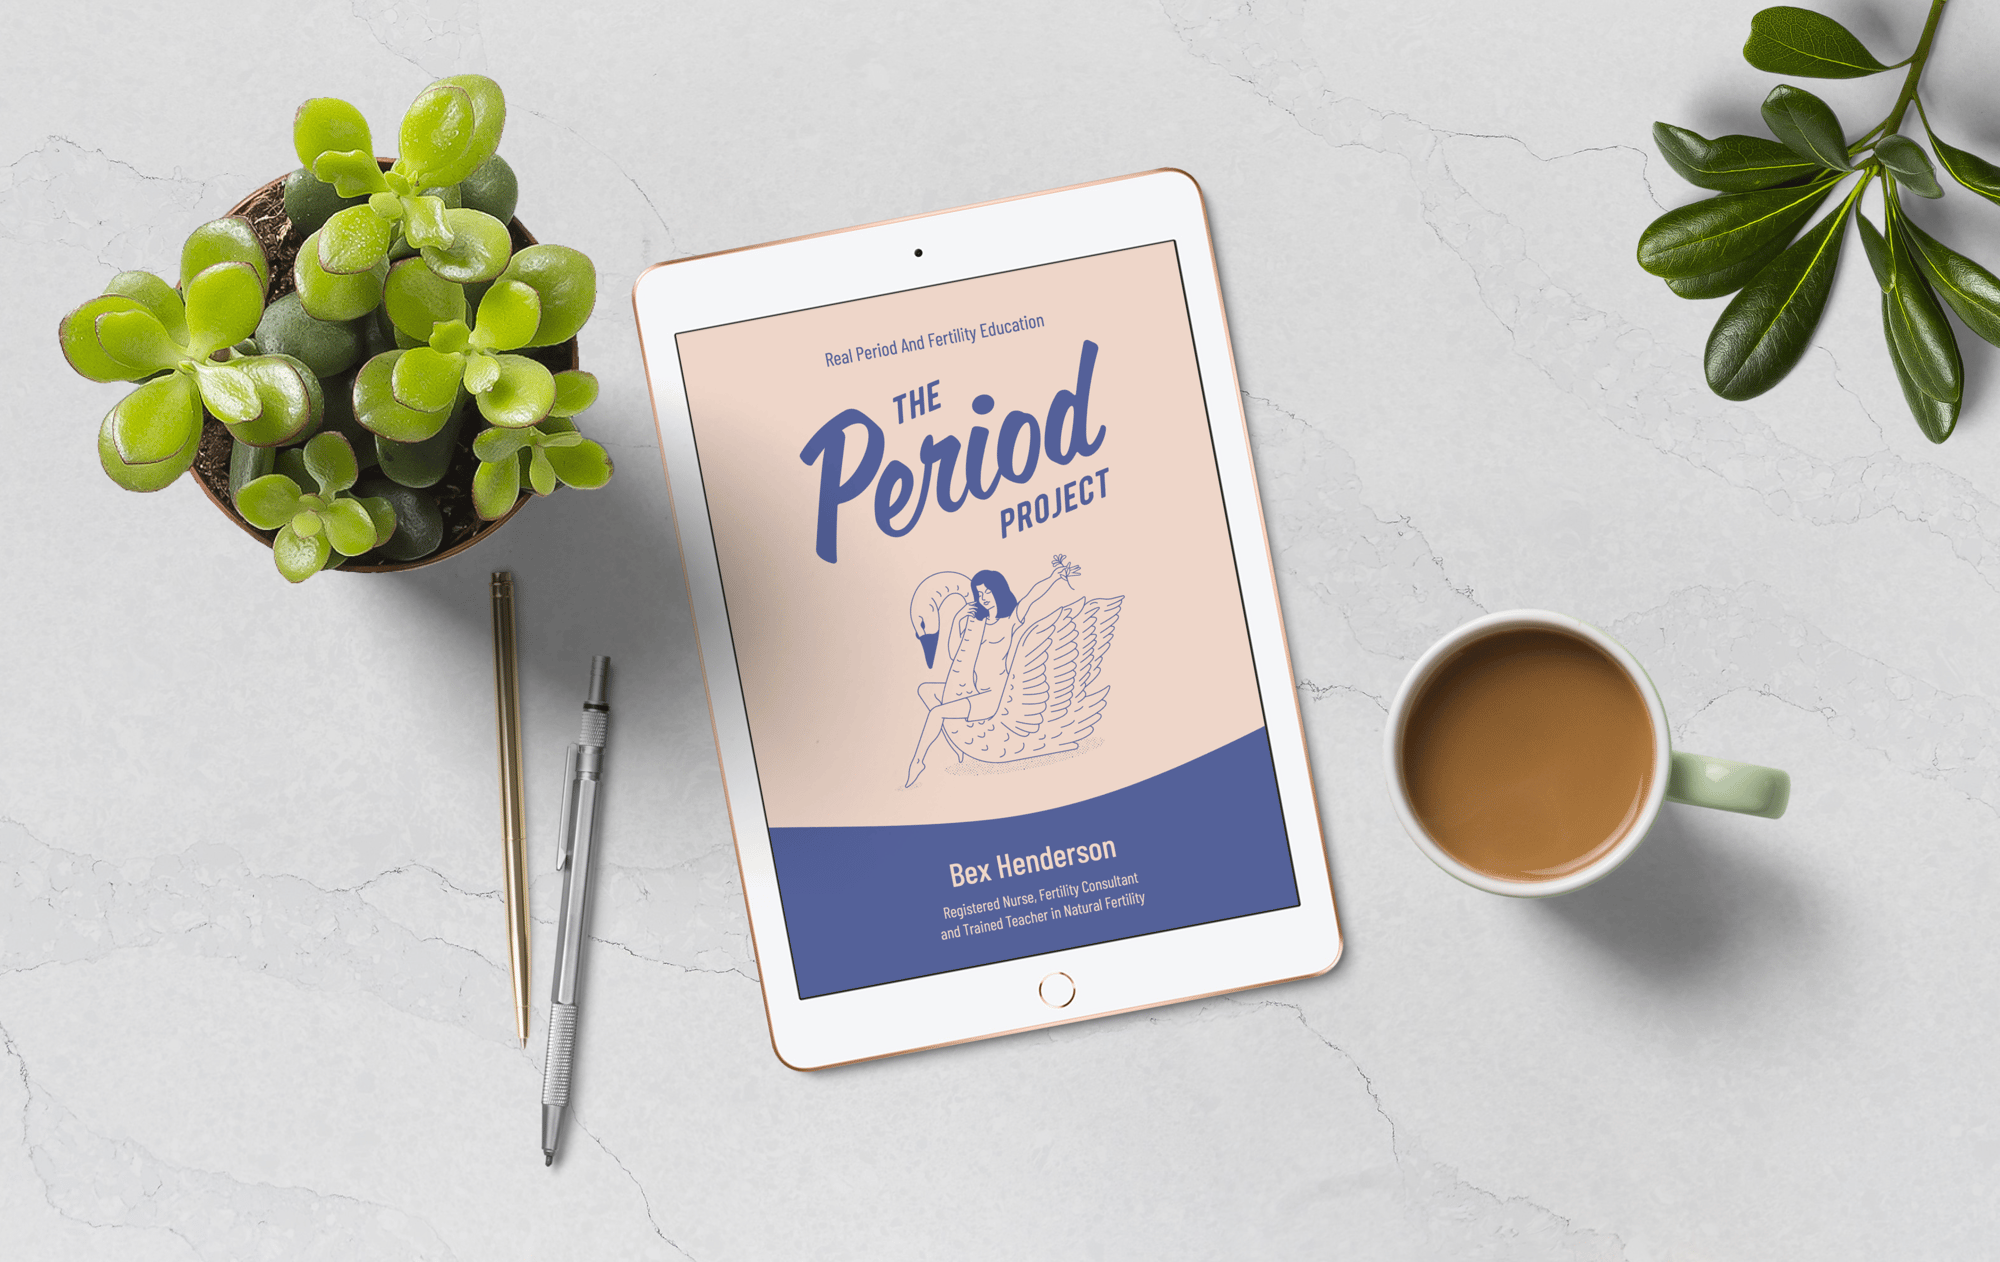 Image of The Period Project e-book